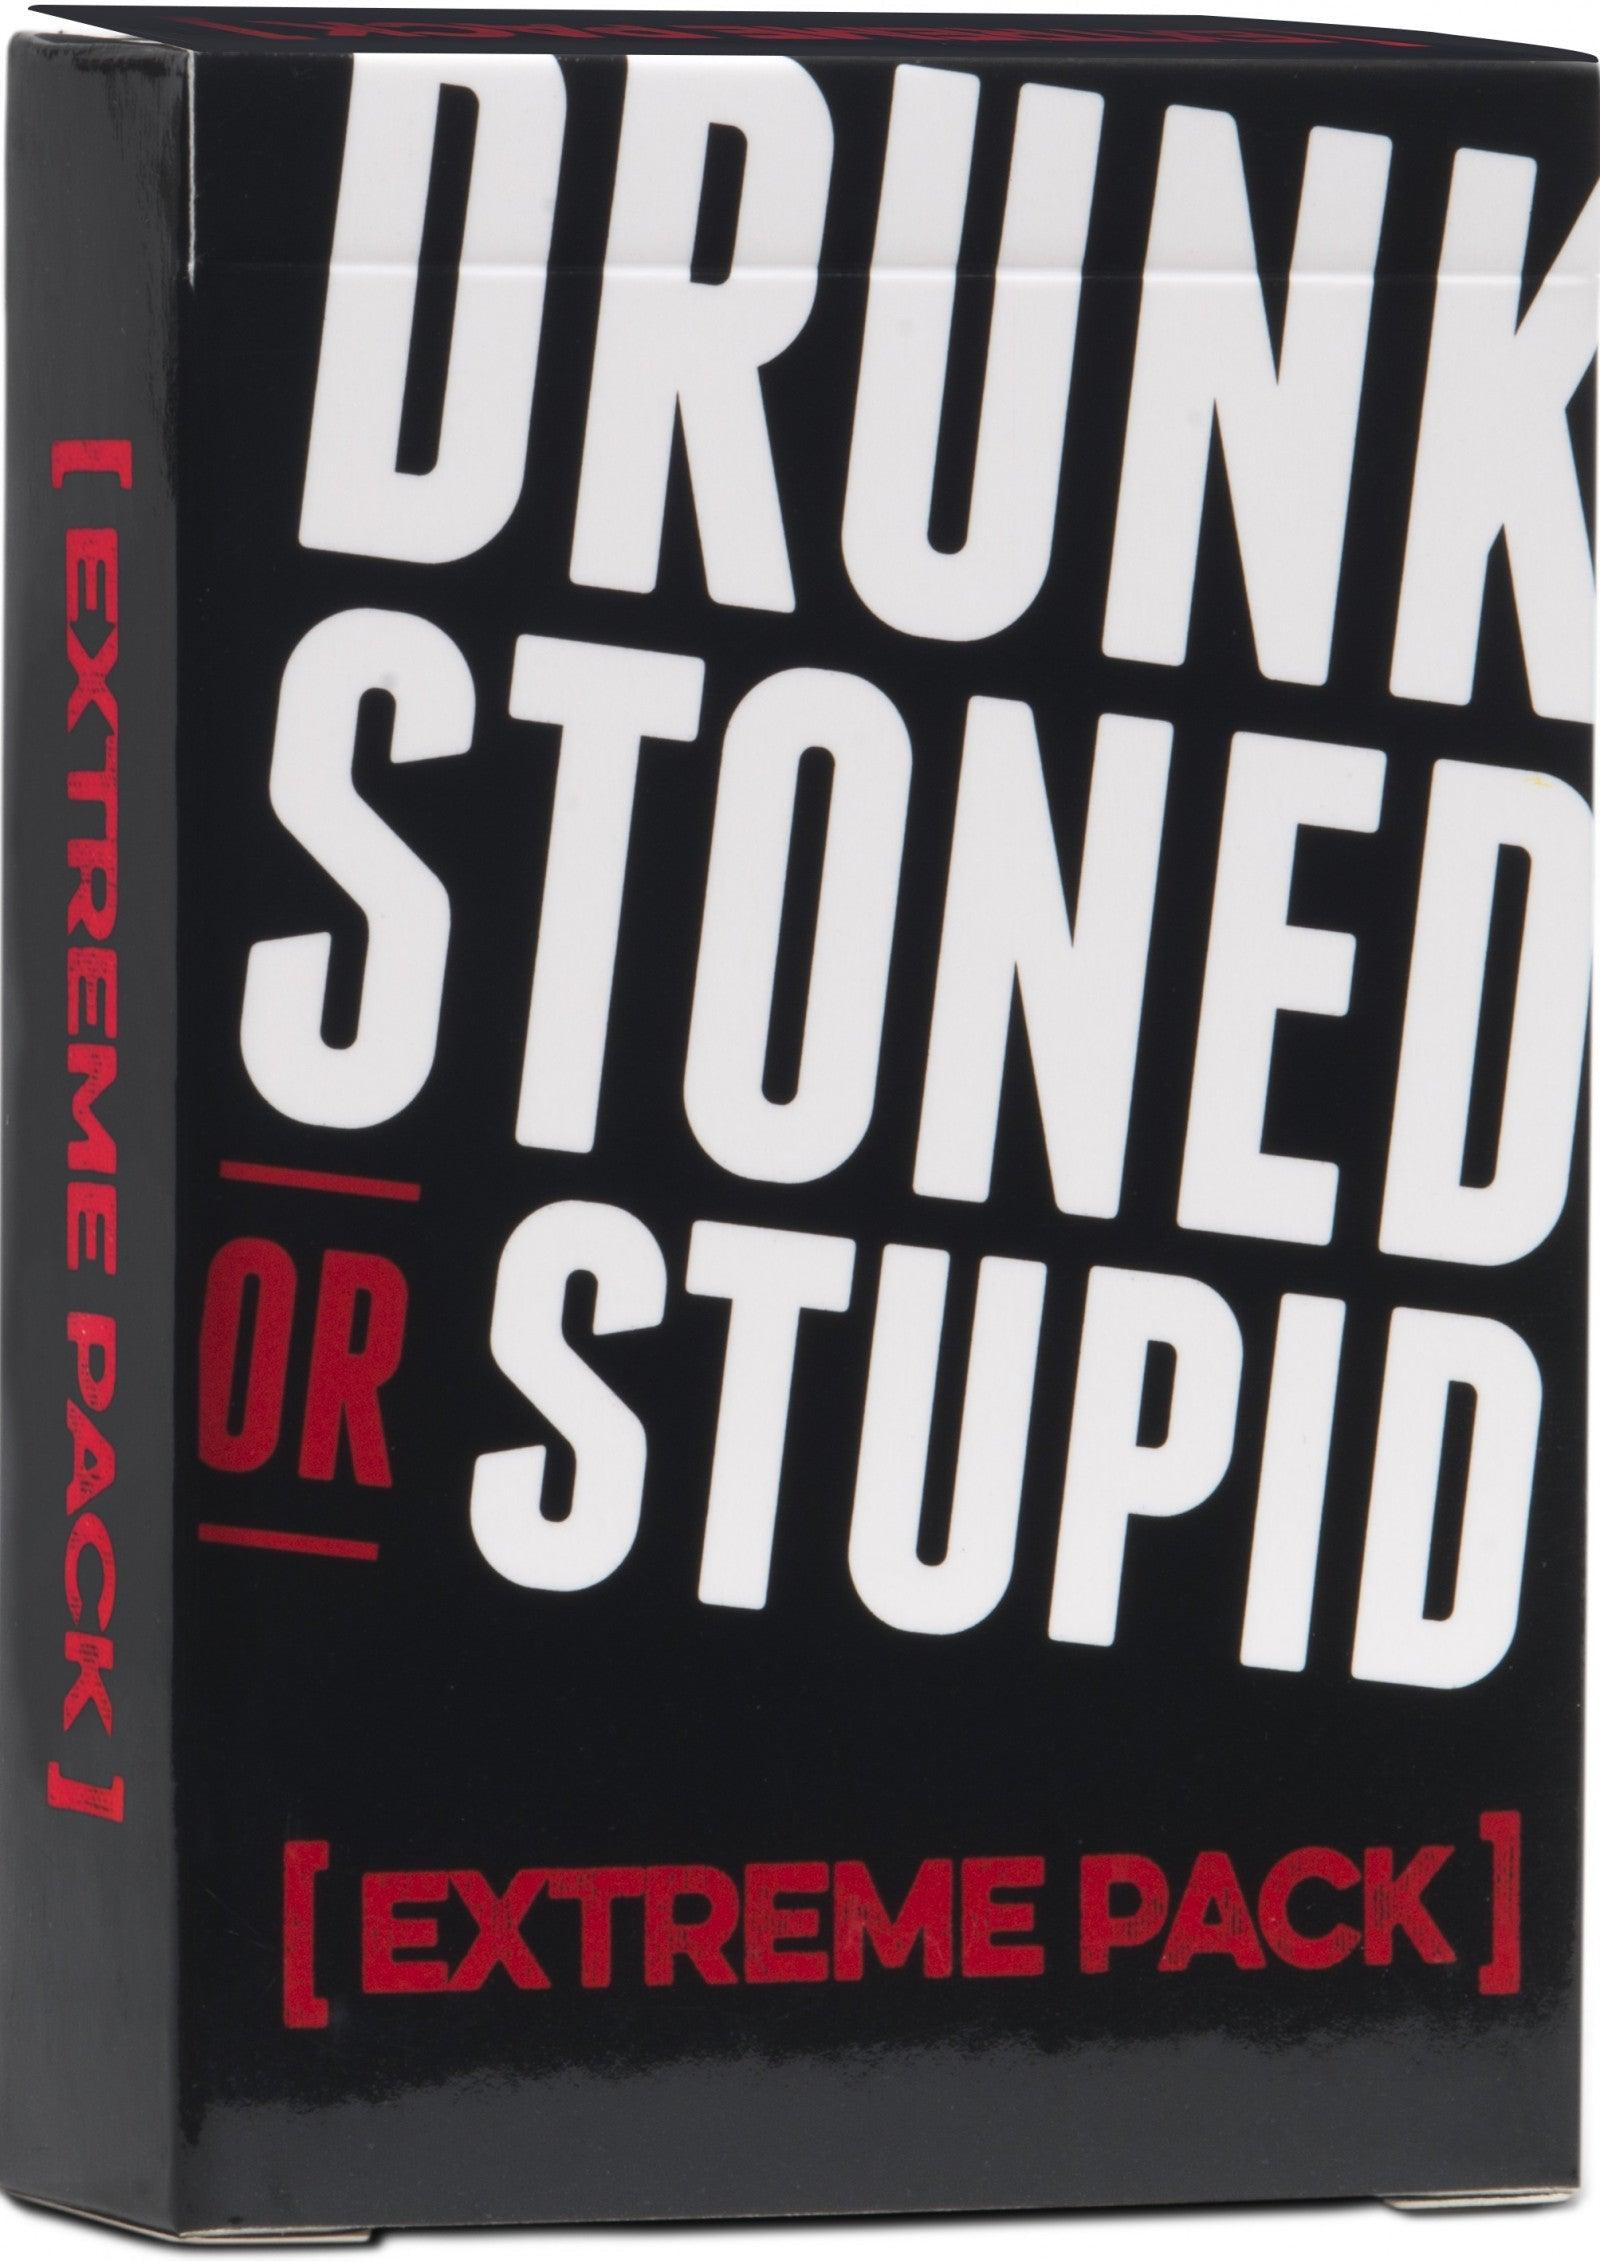 VR-56125 Drunk Stoned or Stupid Extreme Pack - DSS Games - Titan Pop Culture